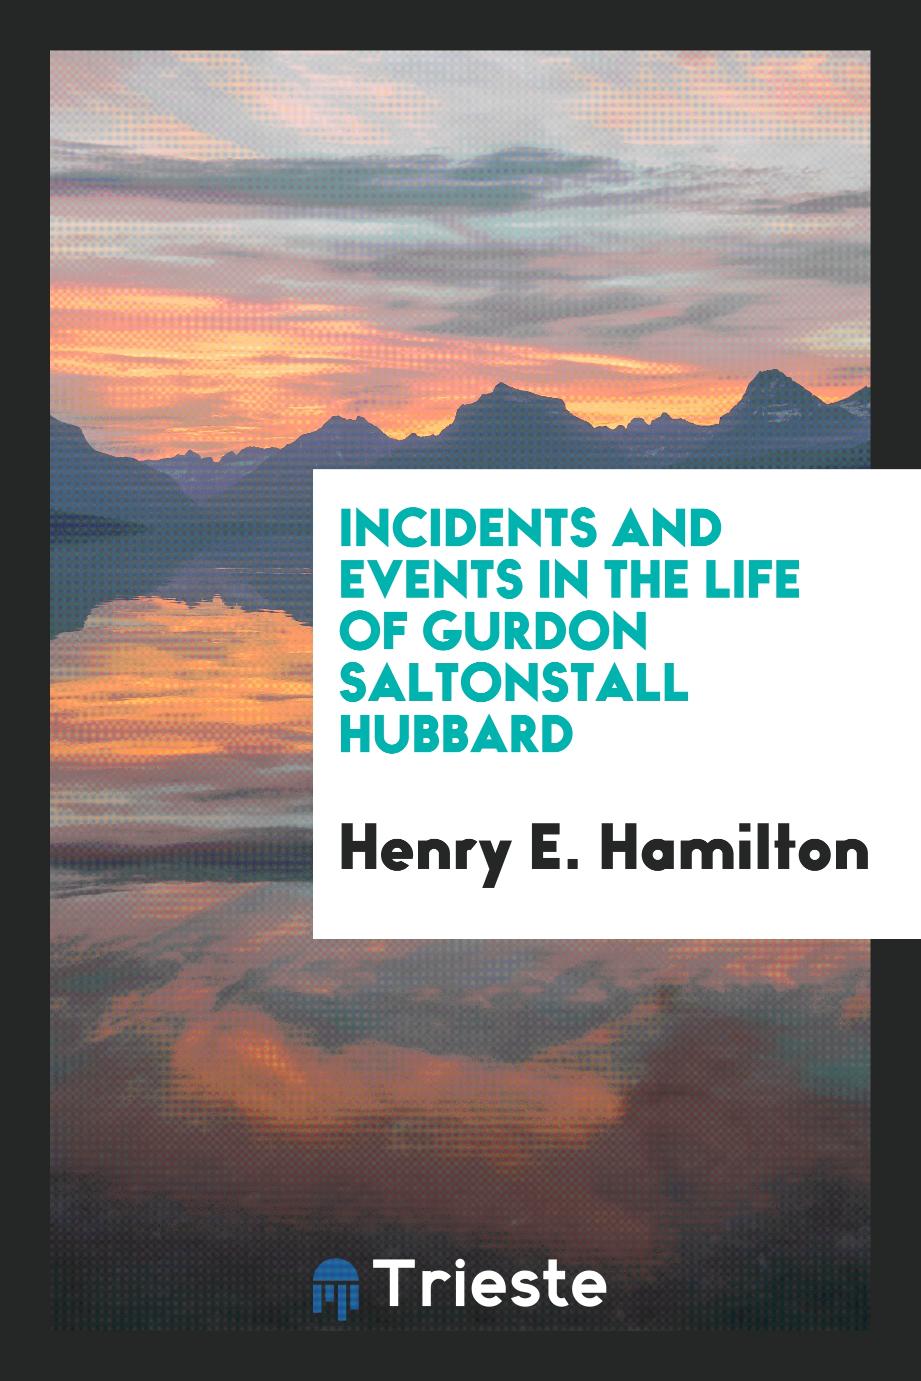 Incidents and events in the life of Gurdon Saltonstall Hubbard